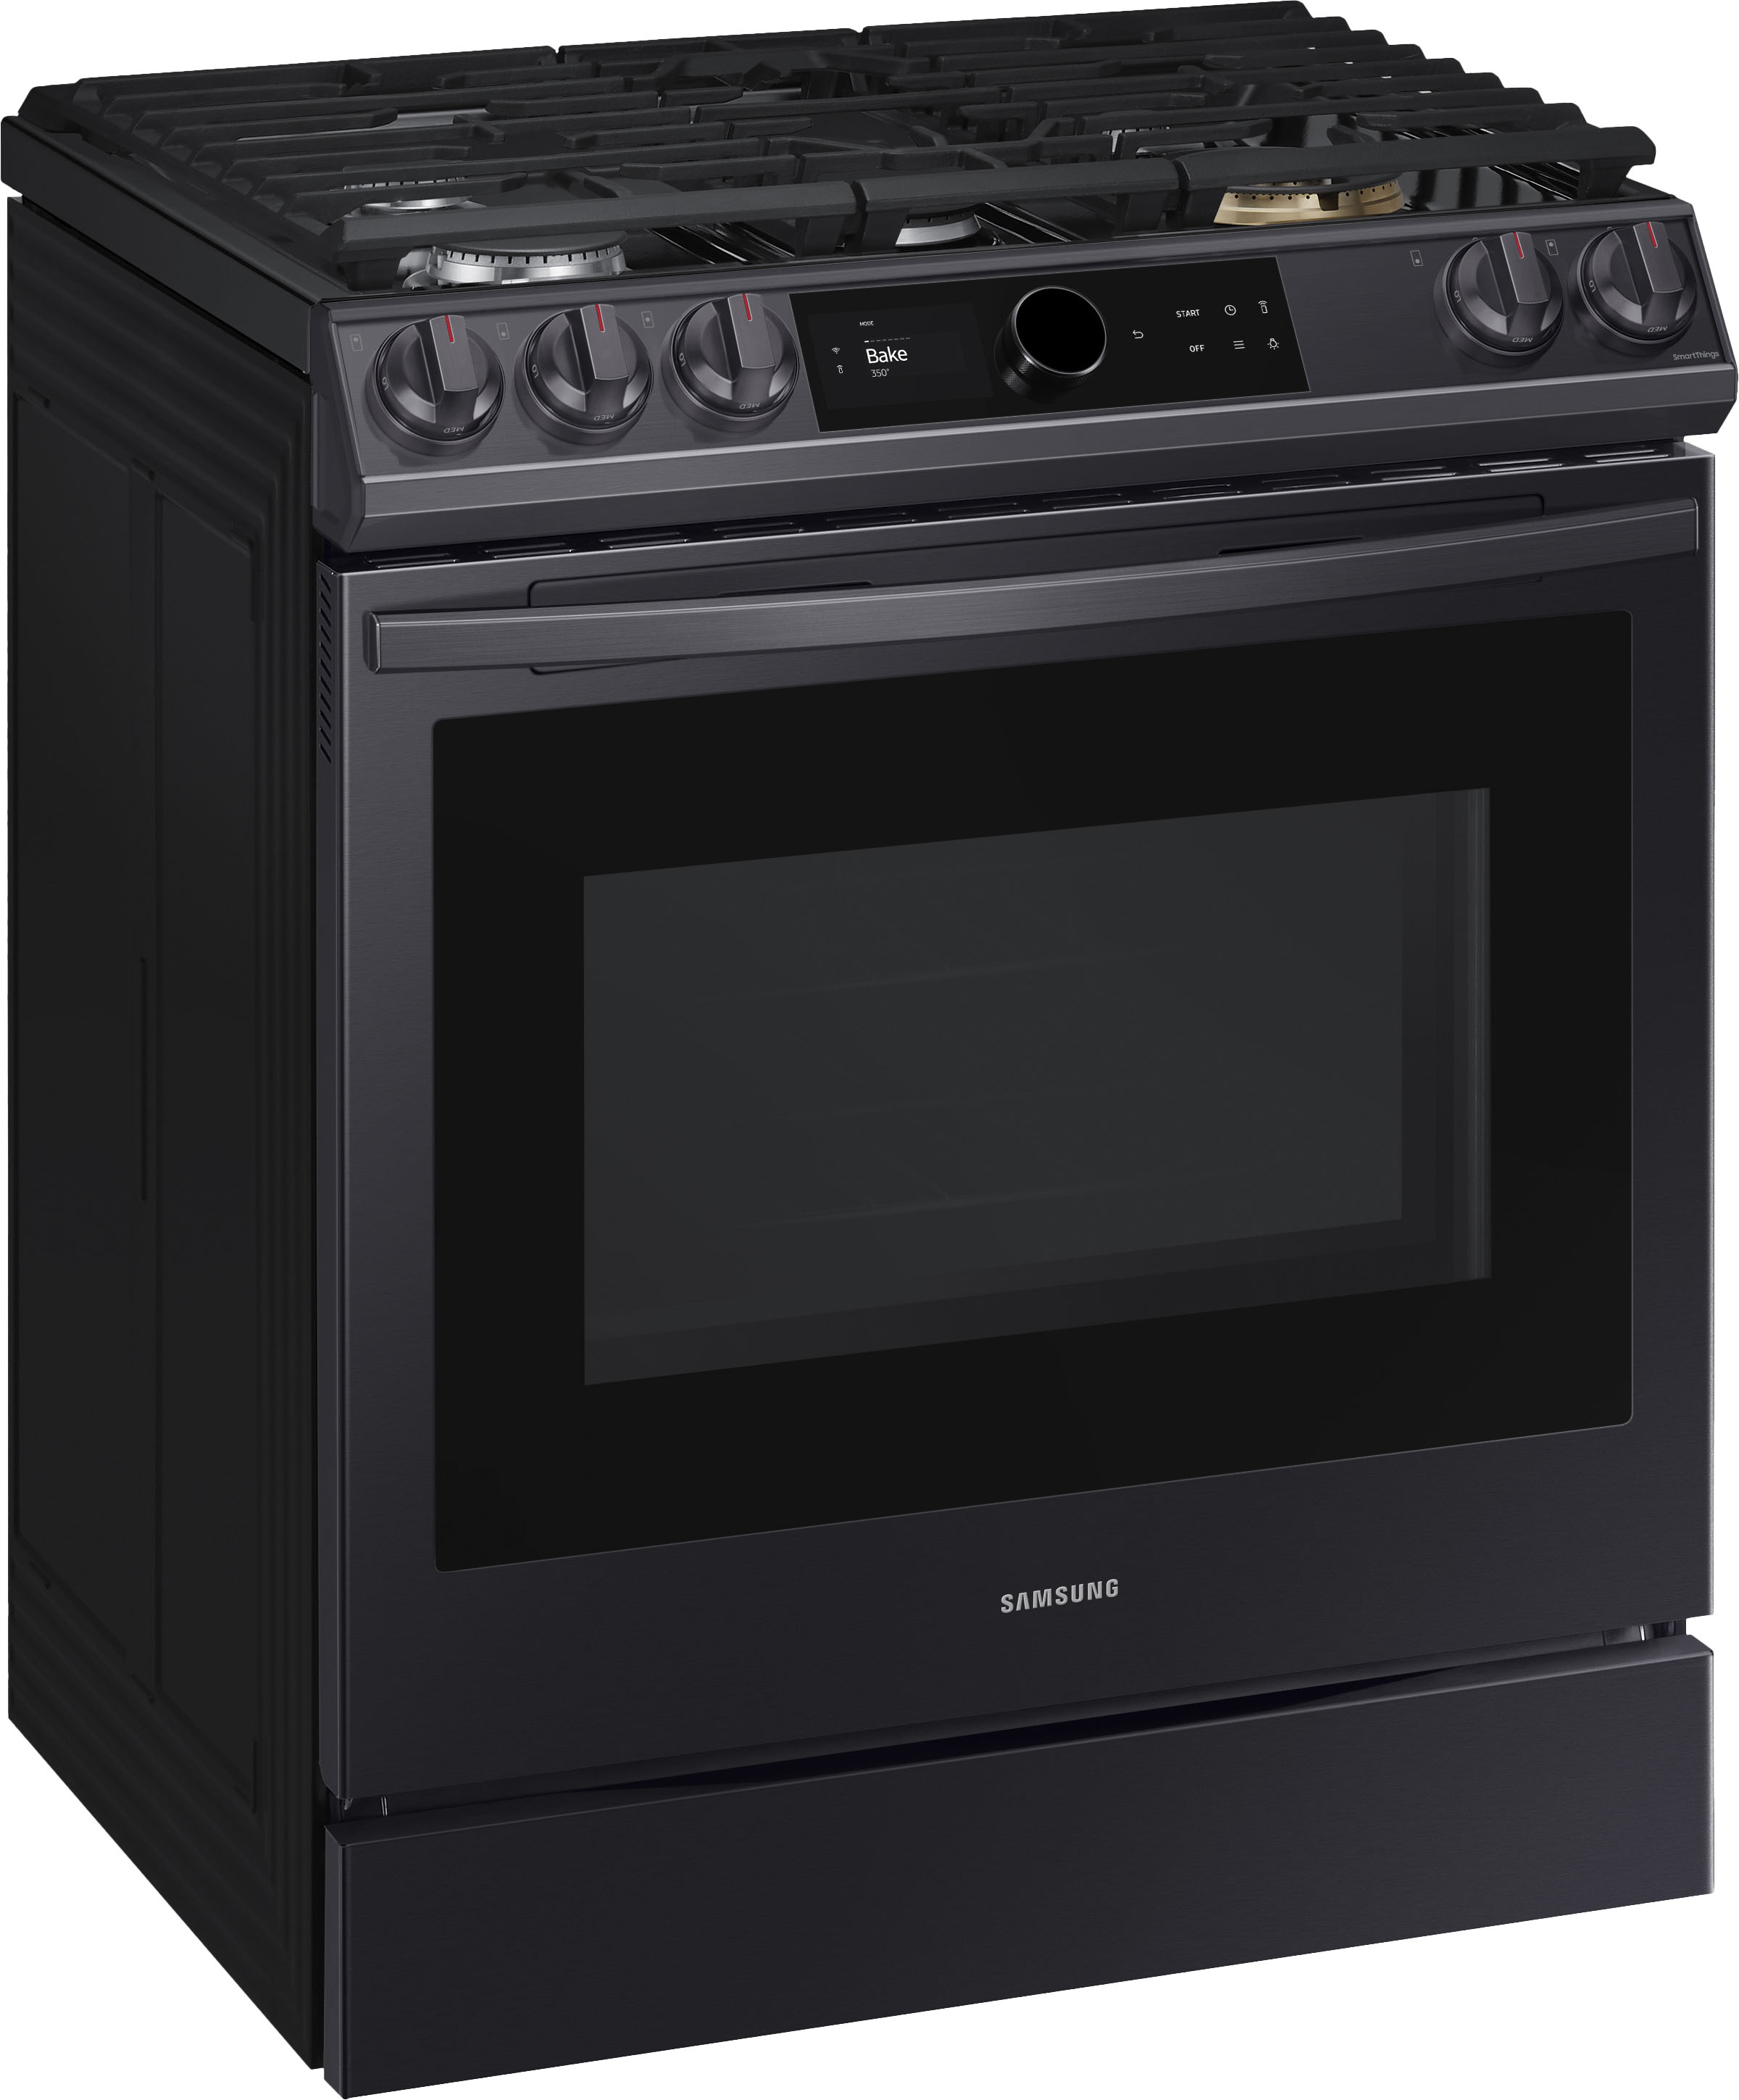 Angle View: Samsung - 6.0 Cu. Ft. Front Control Slide-in Gas Range with Smart Dial, Air Fry & Wi-Fi, Fingerprint Resistant - Navy steel